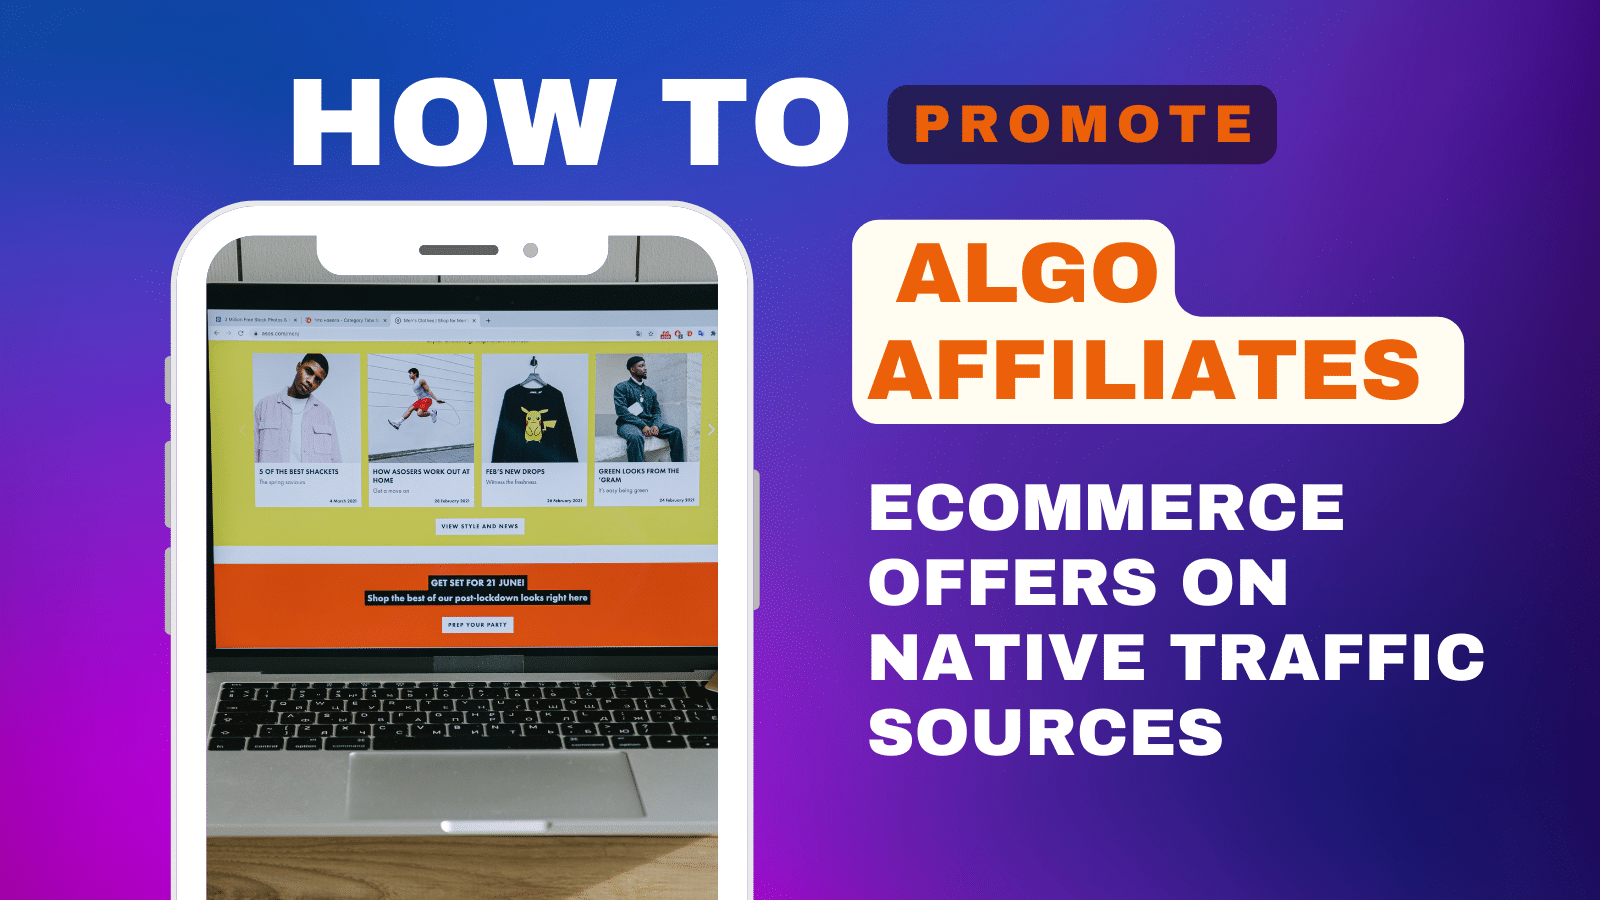 How to Promote Algo Affiliates eCommerce Offers on Native Traffic Sources